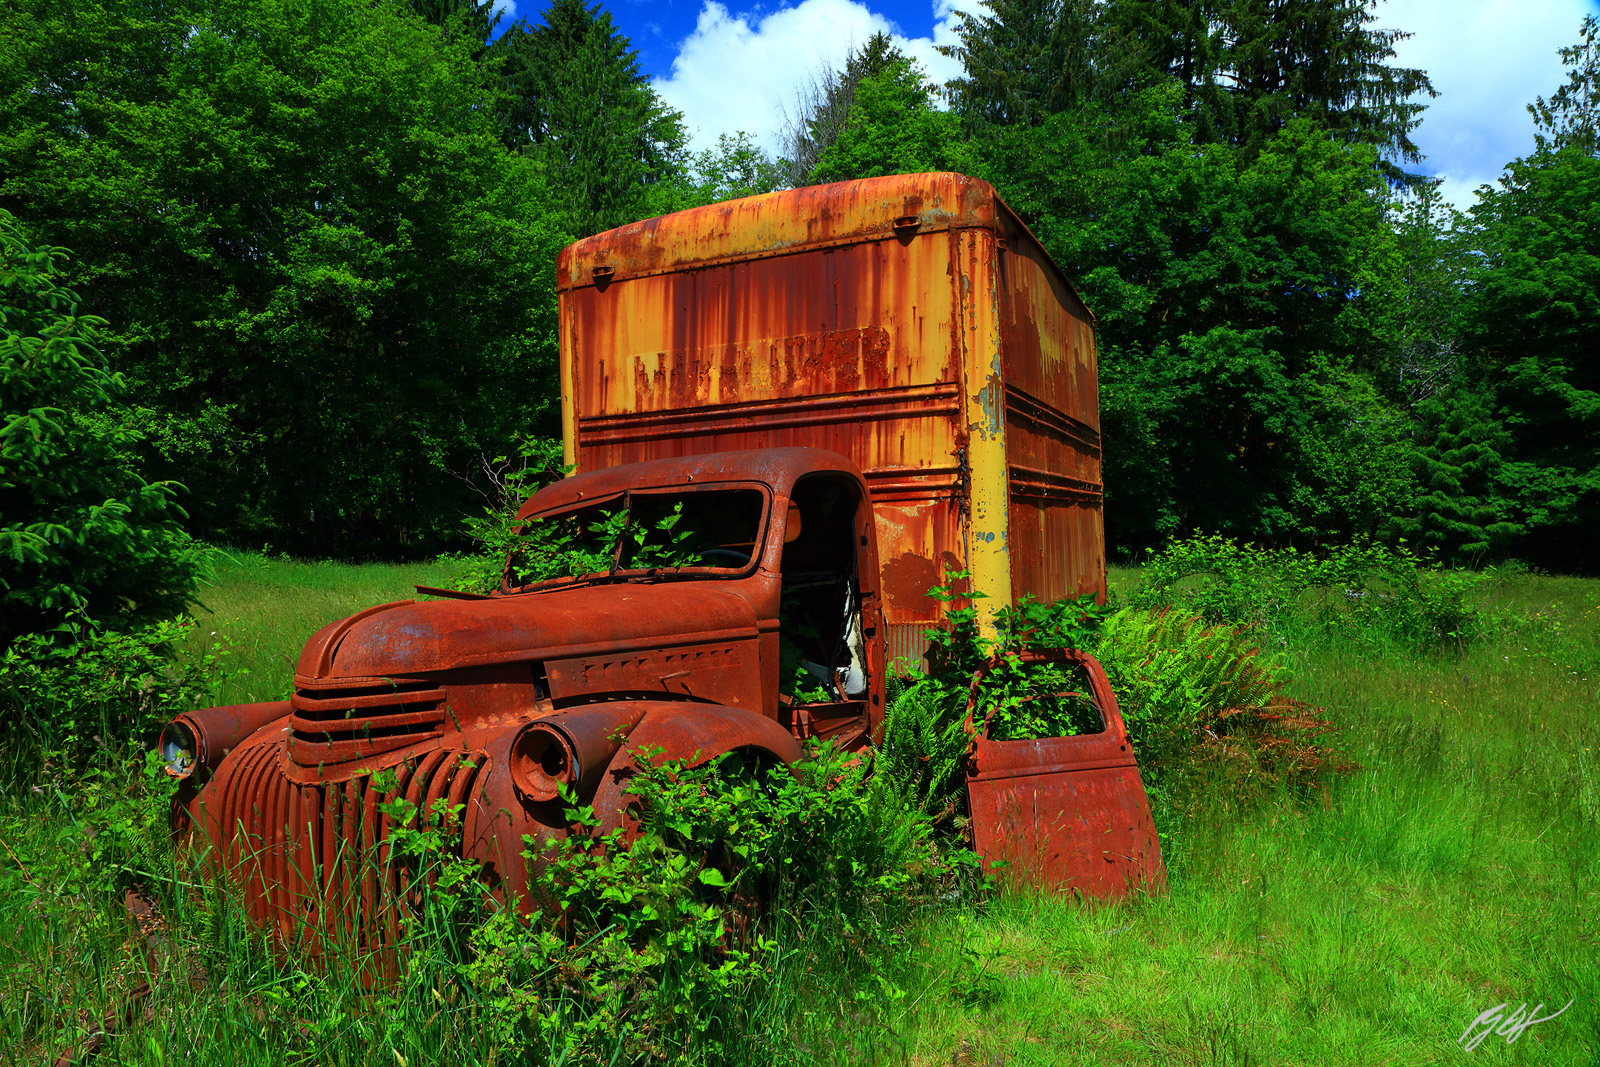 Rusty Truck at the Kester Historic Homestead in Olympic National Park in Washington